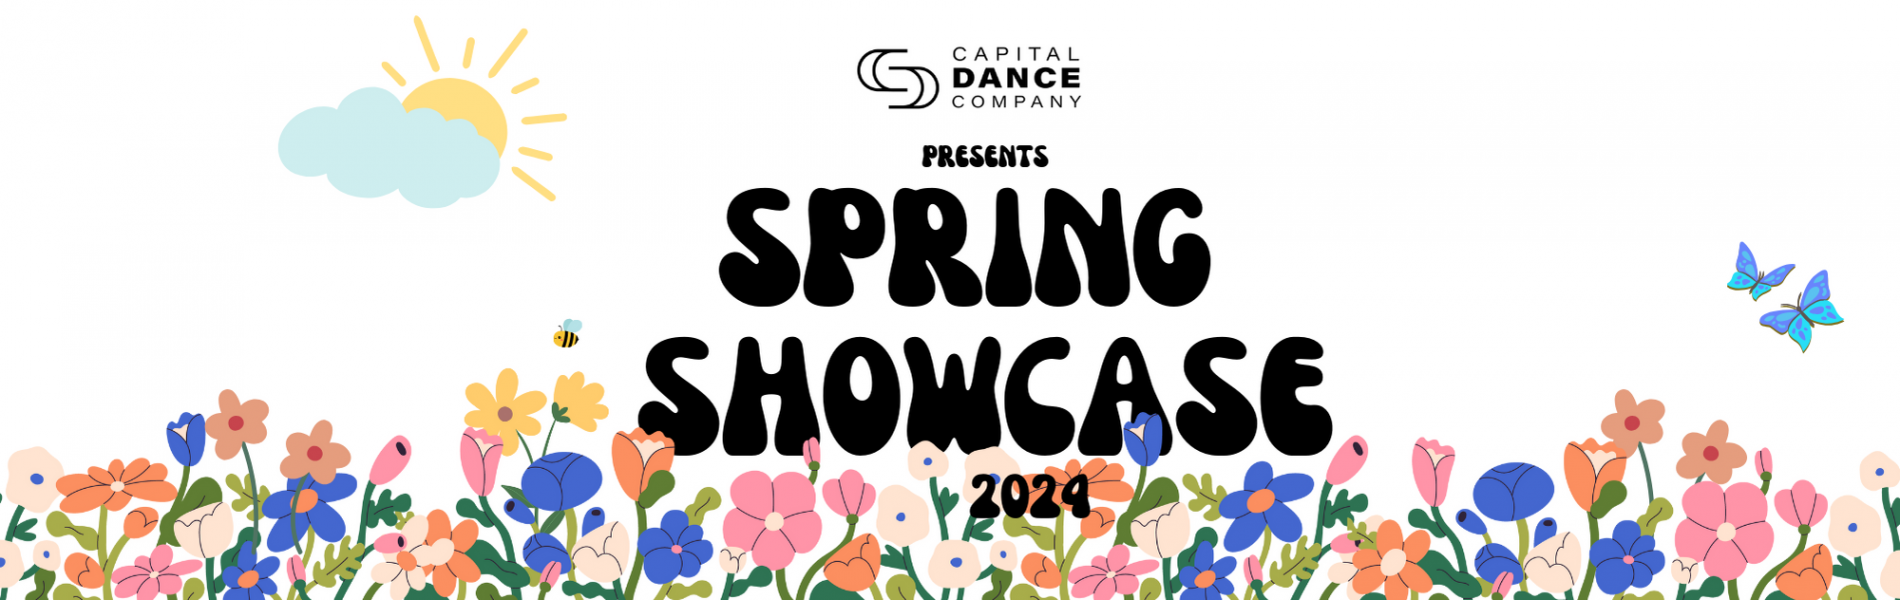 A colorful spring flower scene on a white background with the words, Capital Dance Company presents Spring Showcase.